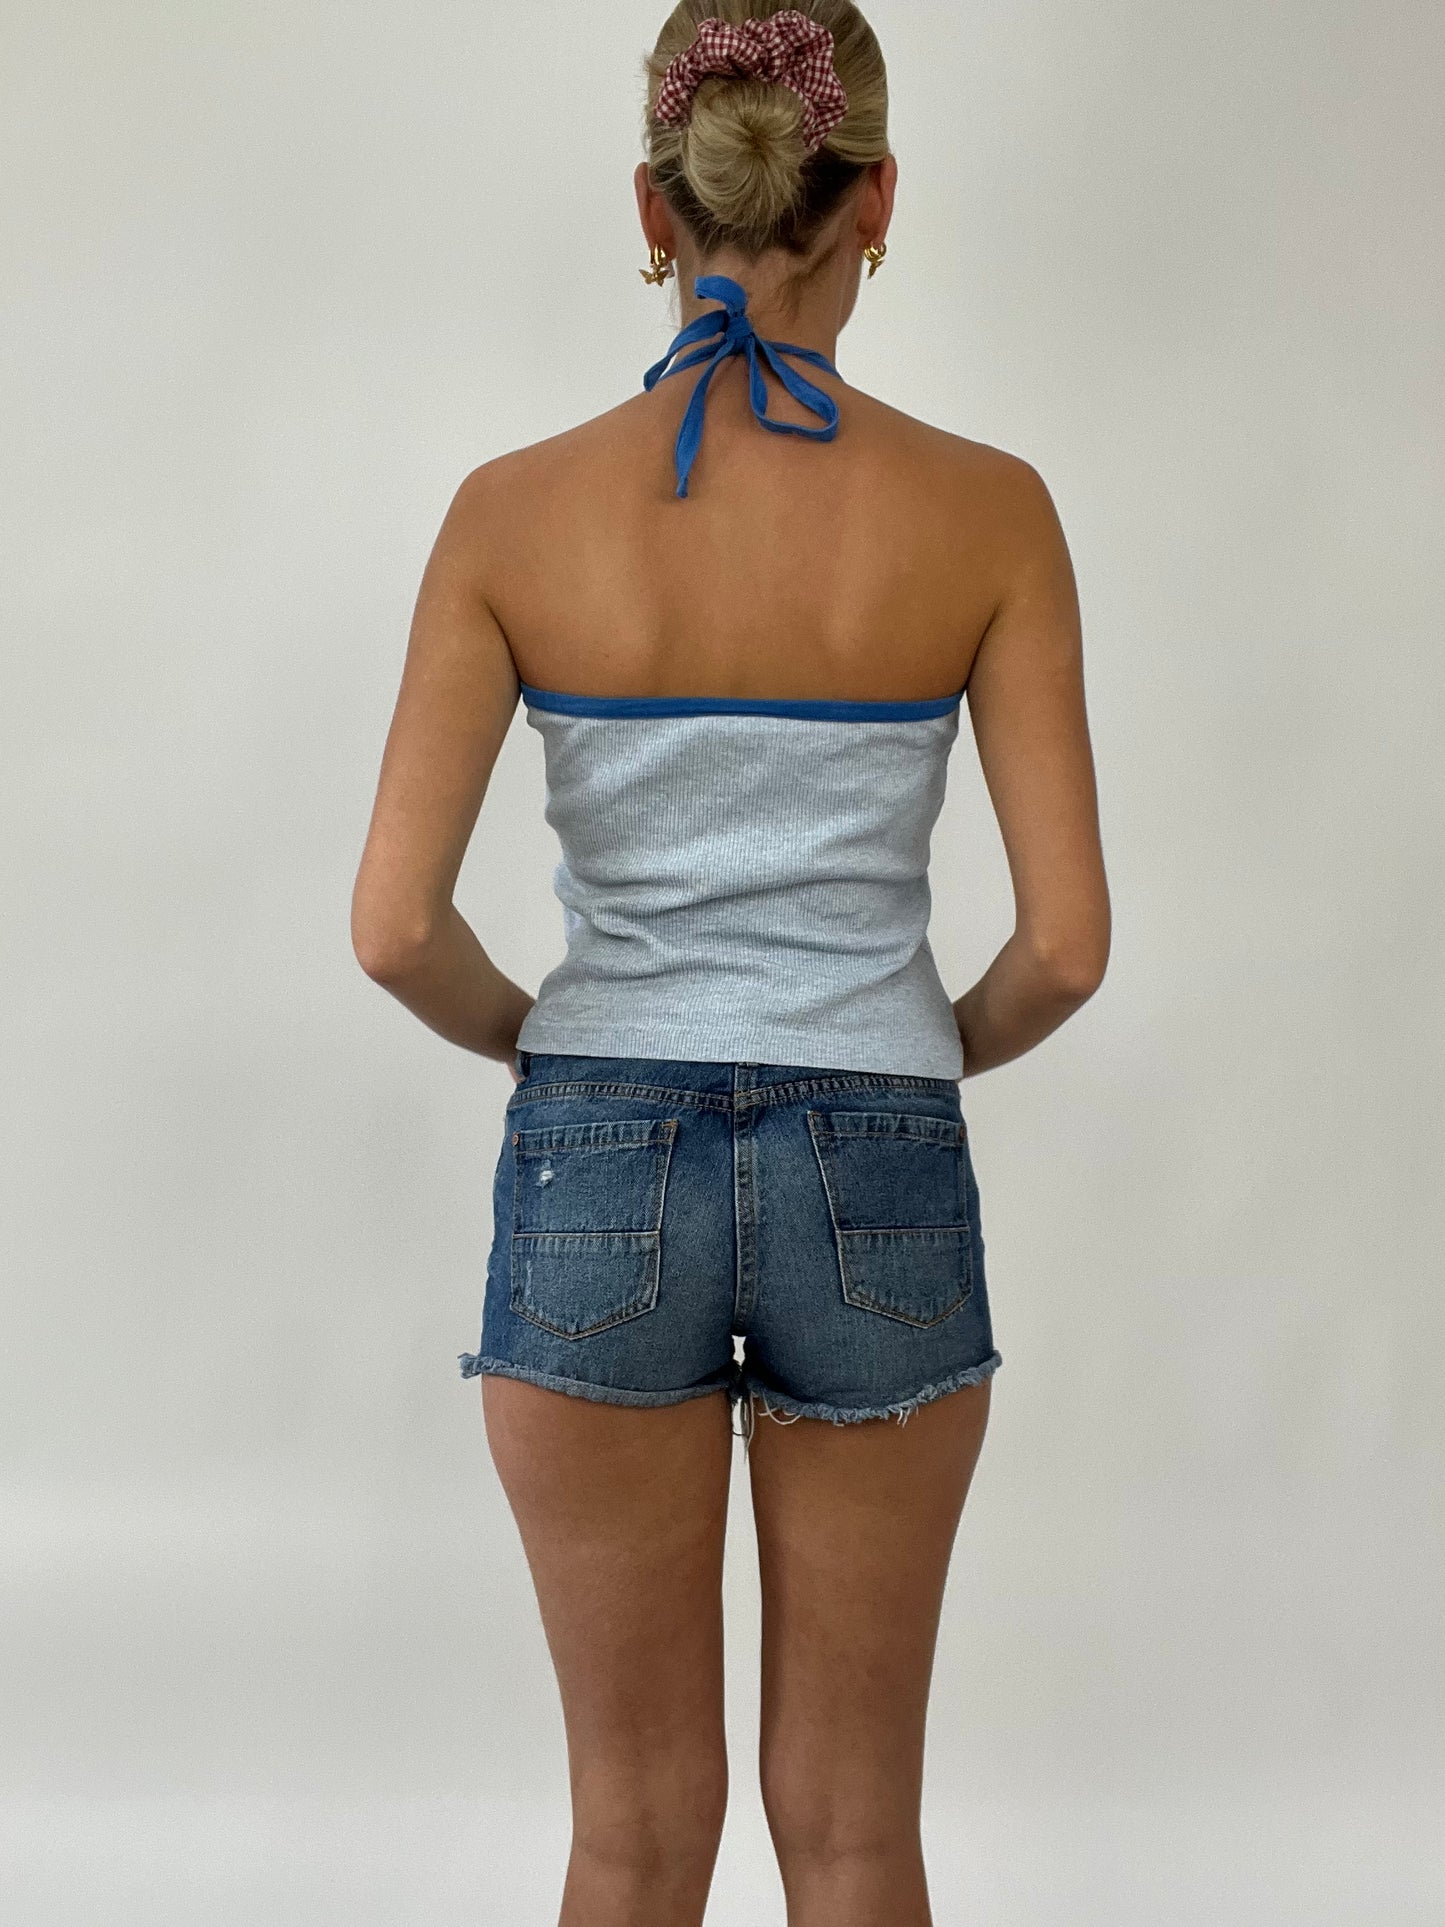 COCONUT GIRL DROP | small grey and blue halterneck top with ‘oneill’ spell out